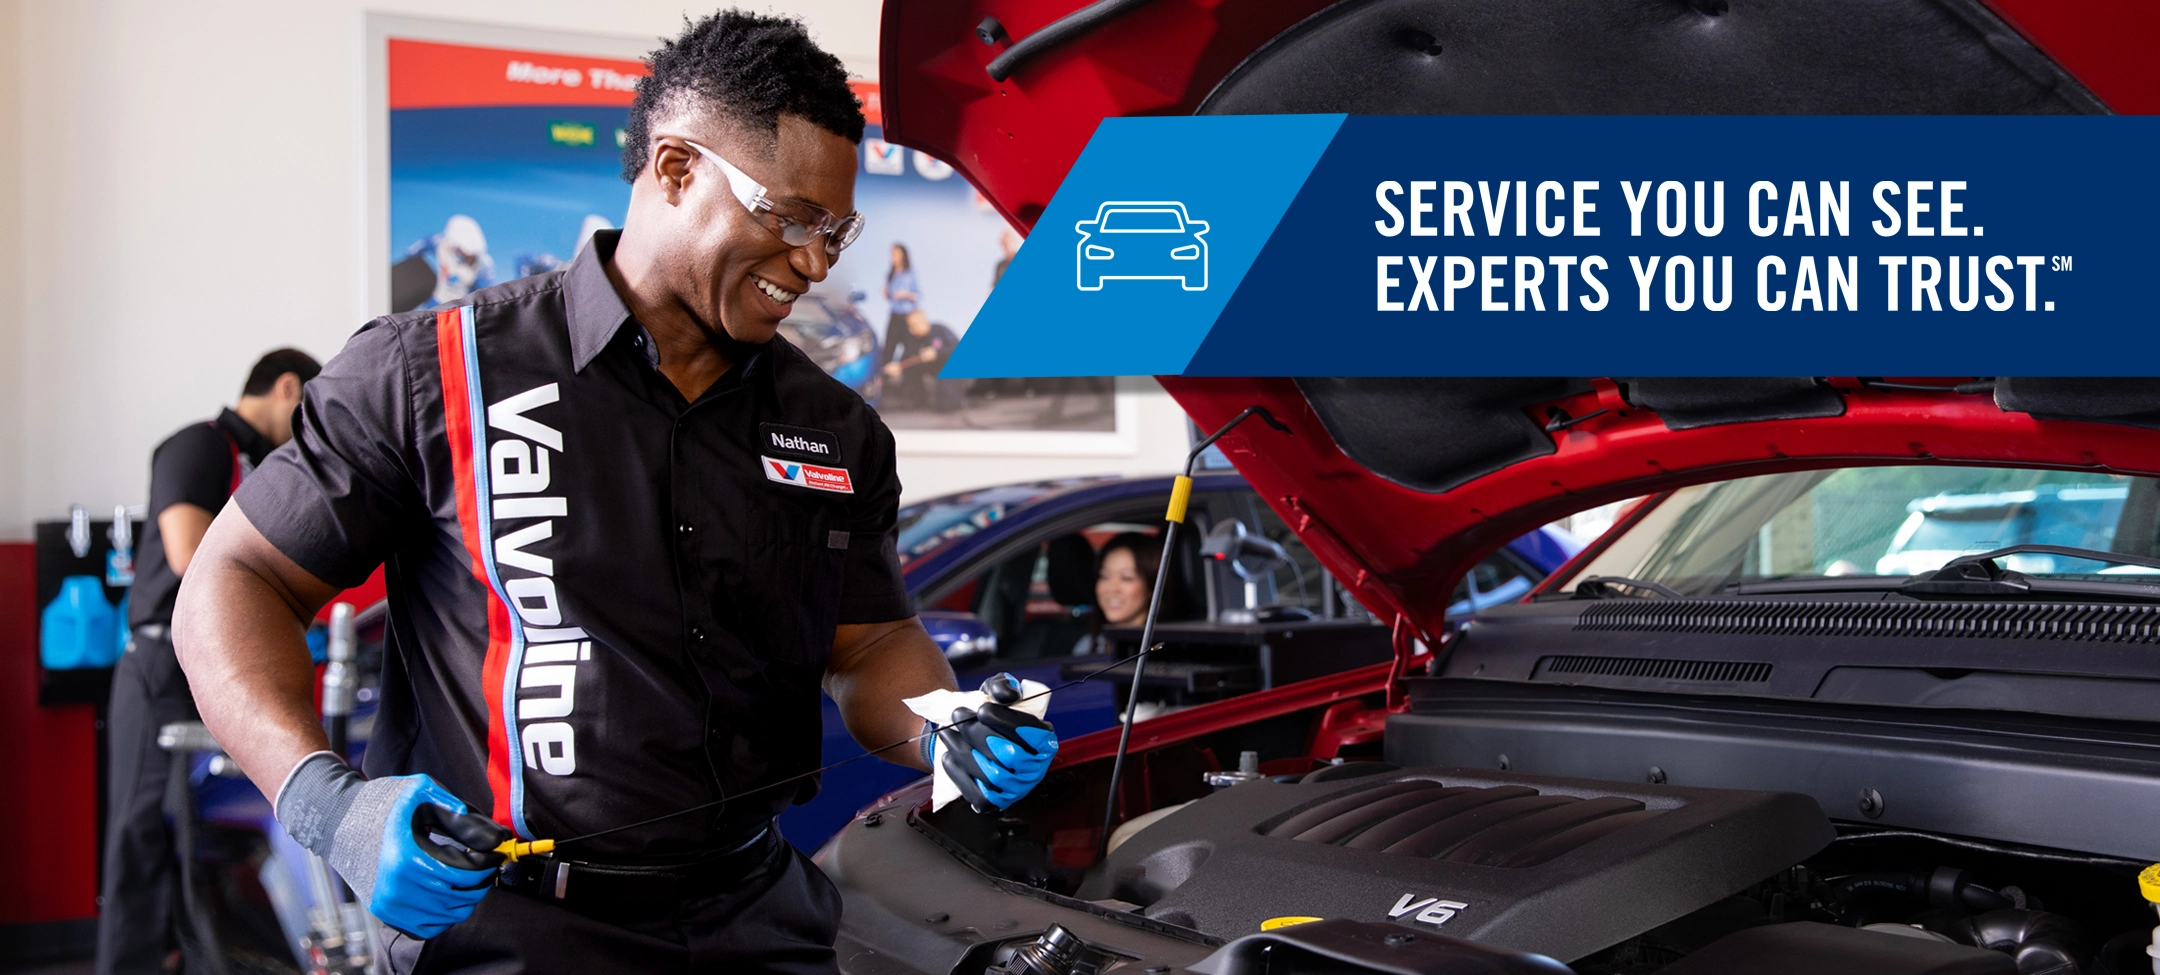 A technician checks oil level during oil change at Valvoline Instant Oil Change. Service you can see, experts you can trust